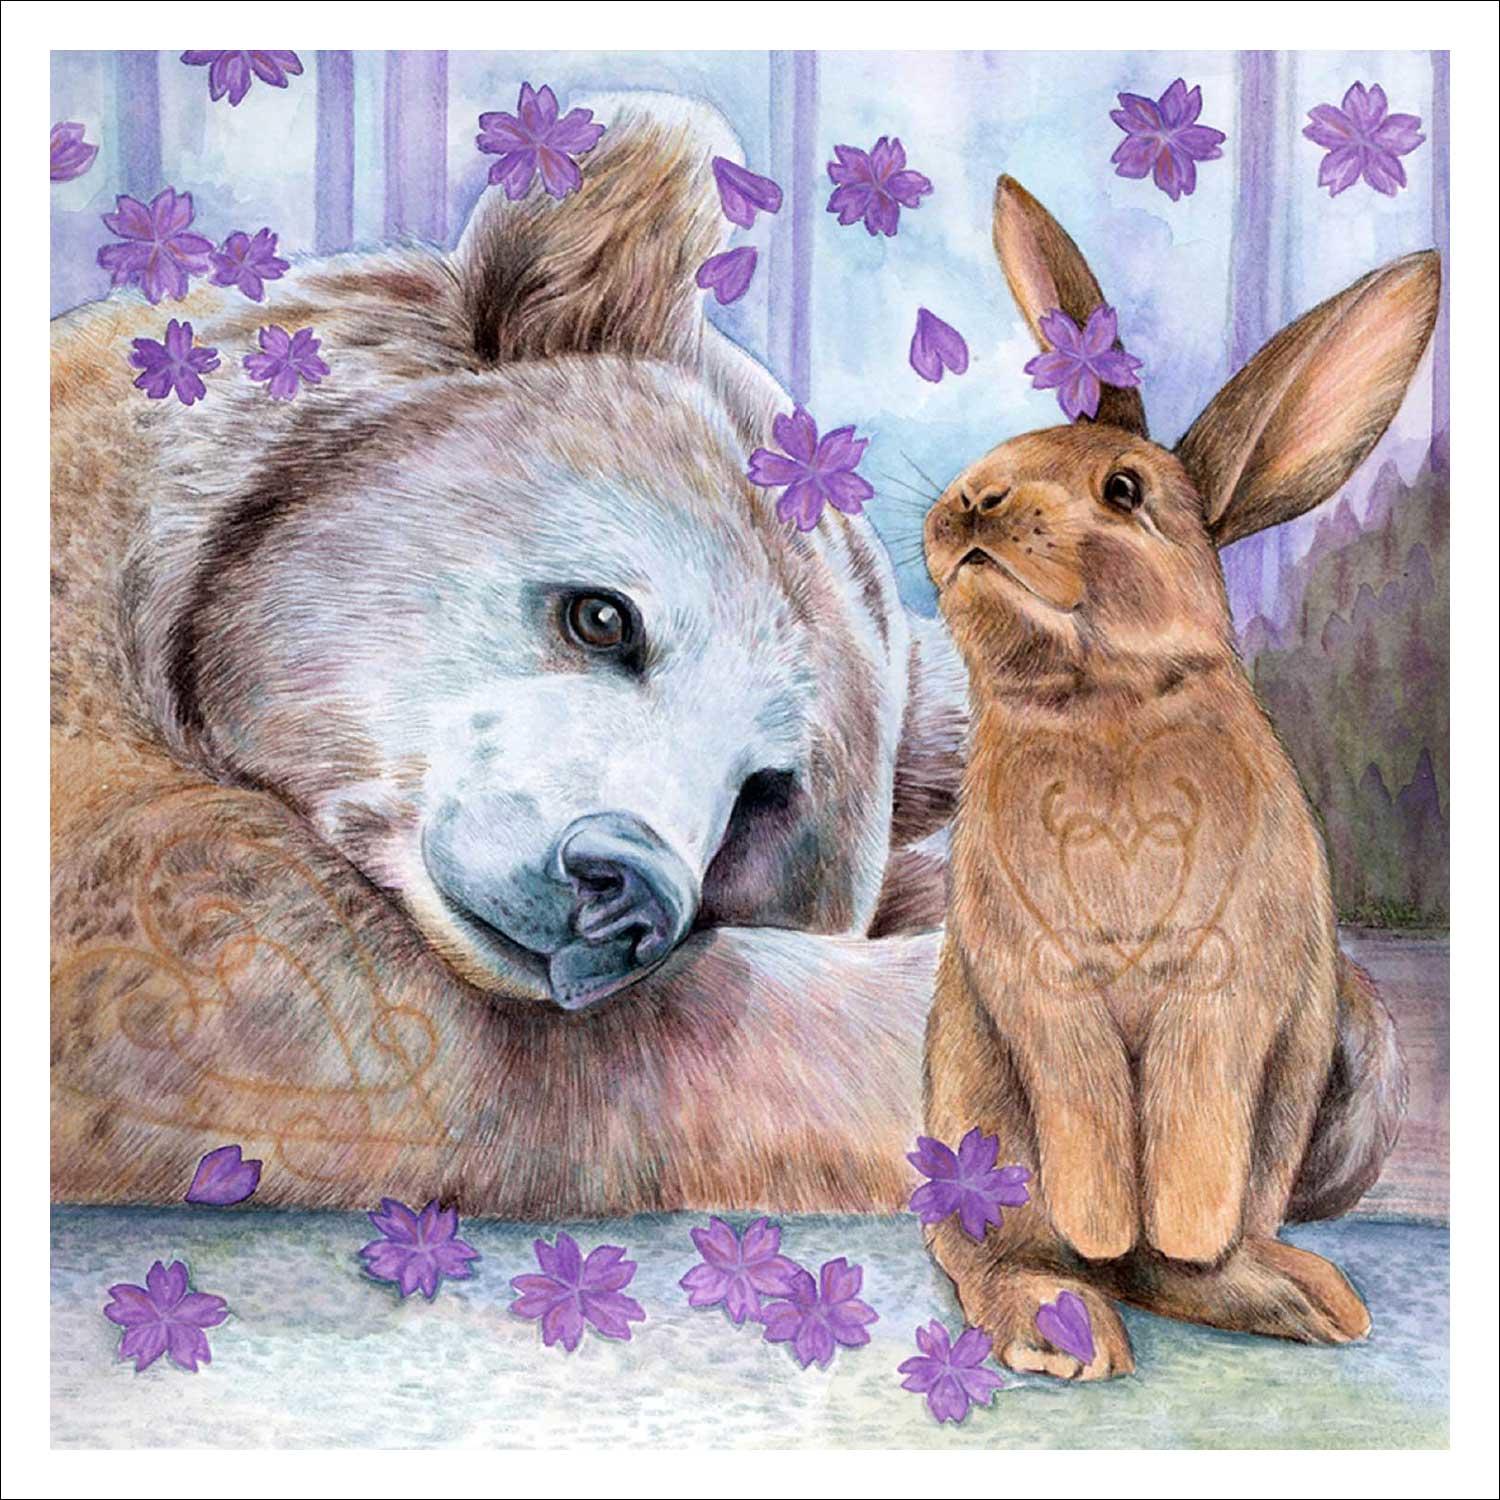 Bear and Bunny Art Print from an original painting by artist Marjory Tait